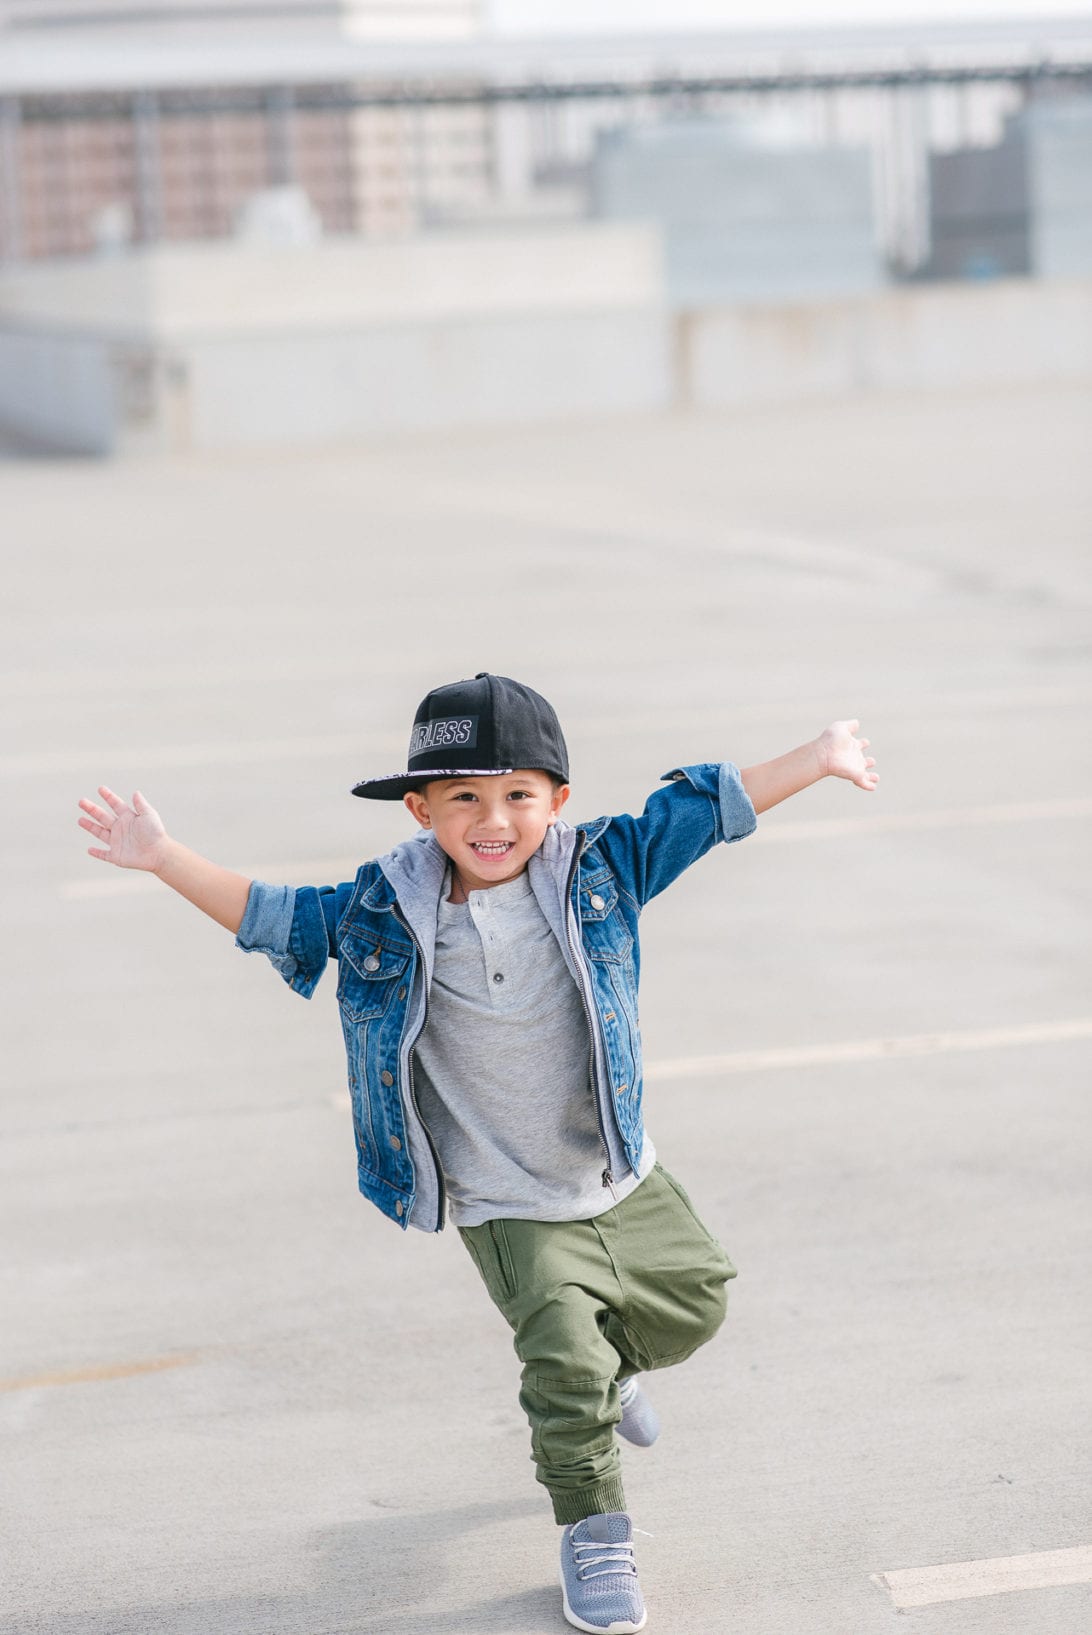 skateboard, toddler fashion, toddler boy style, urban toddler boy fashion, fitness fashion, Lorna Jane Activewear, leopard tights, mommy and me style, mommy and me fashion, #boymom, #houstonblogger, street style, fearless, comfort zone, face your fears